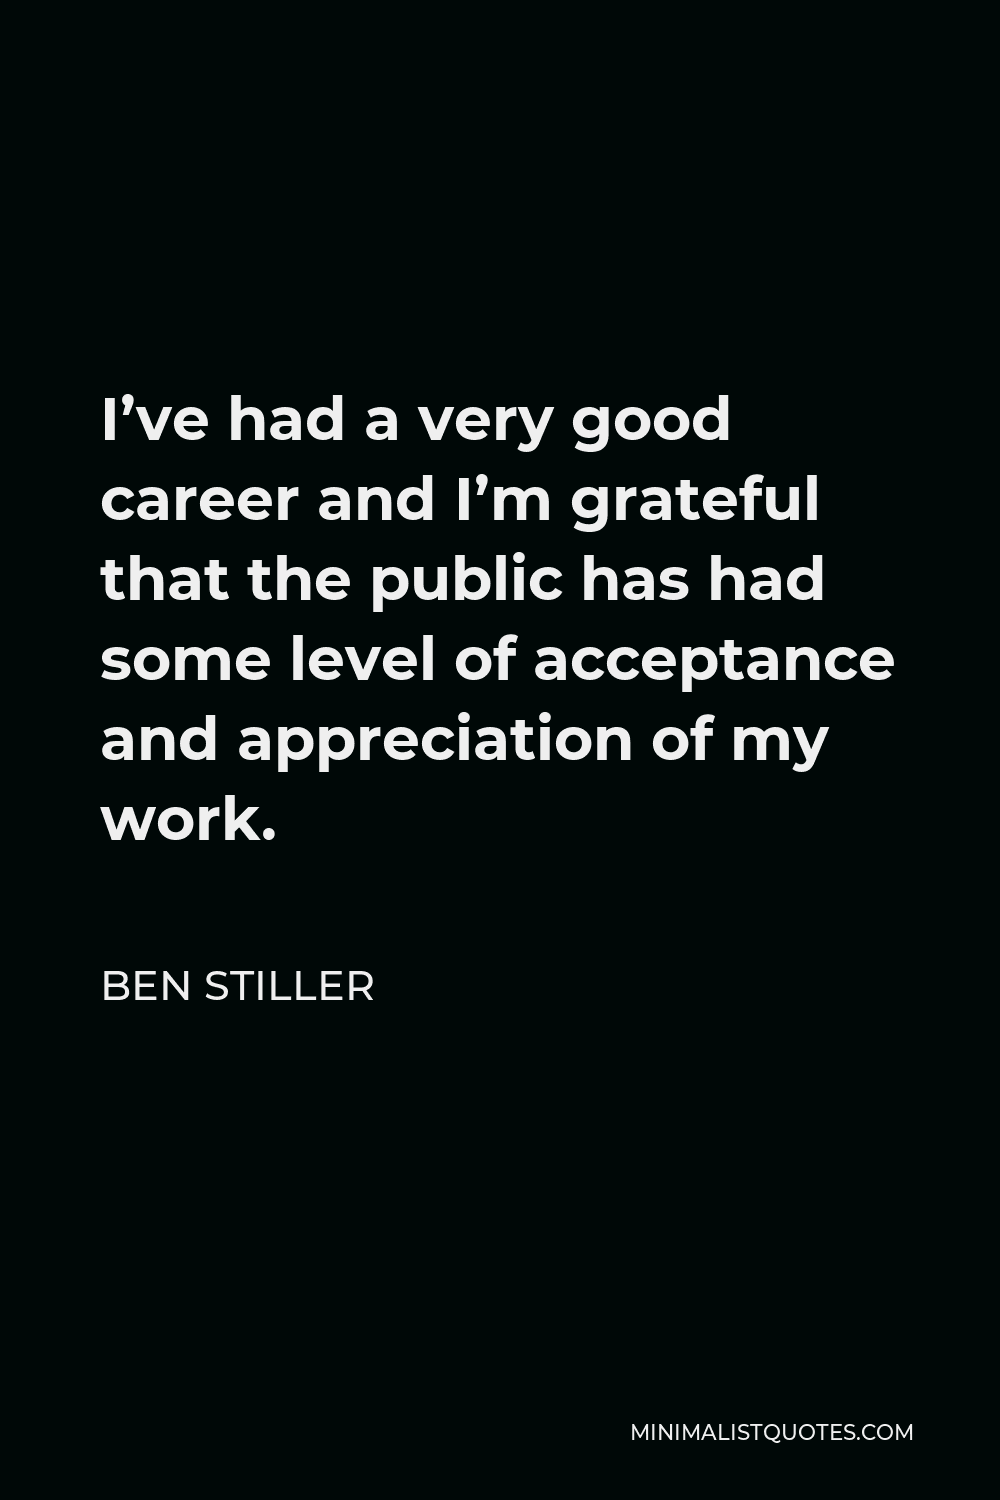 Ben Stiller Quote - I’ve had a very good career and I’m grateful that the public has had some level of acceptance and appreciation of my work.